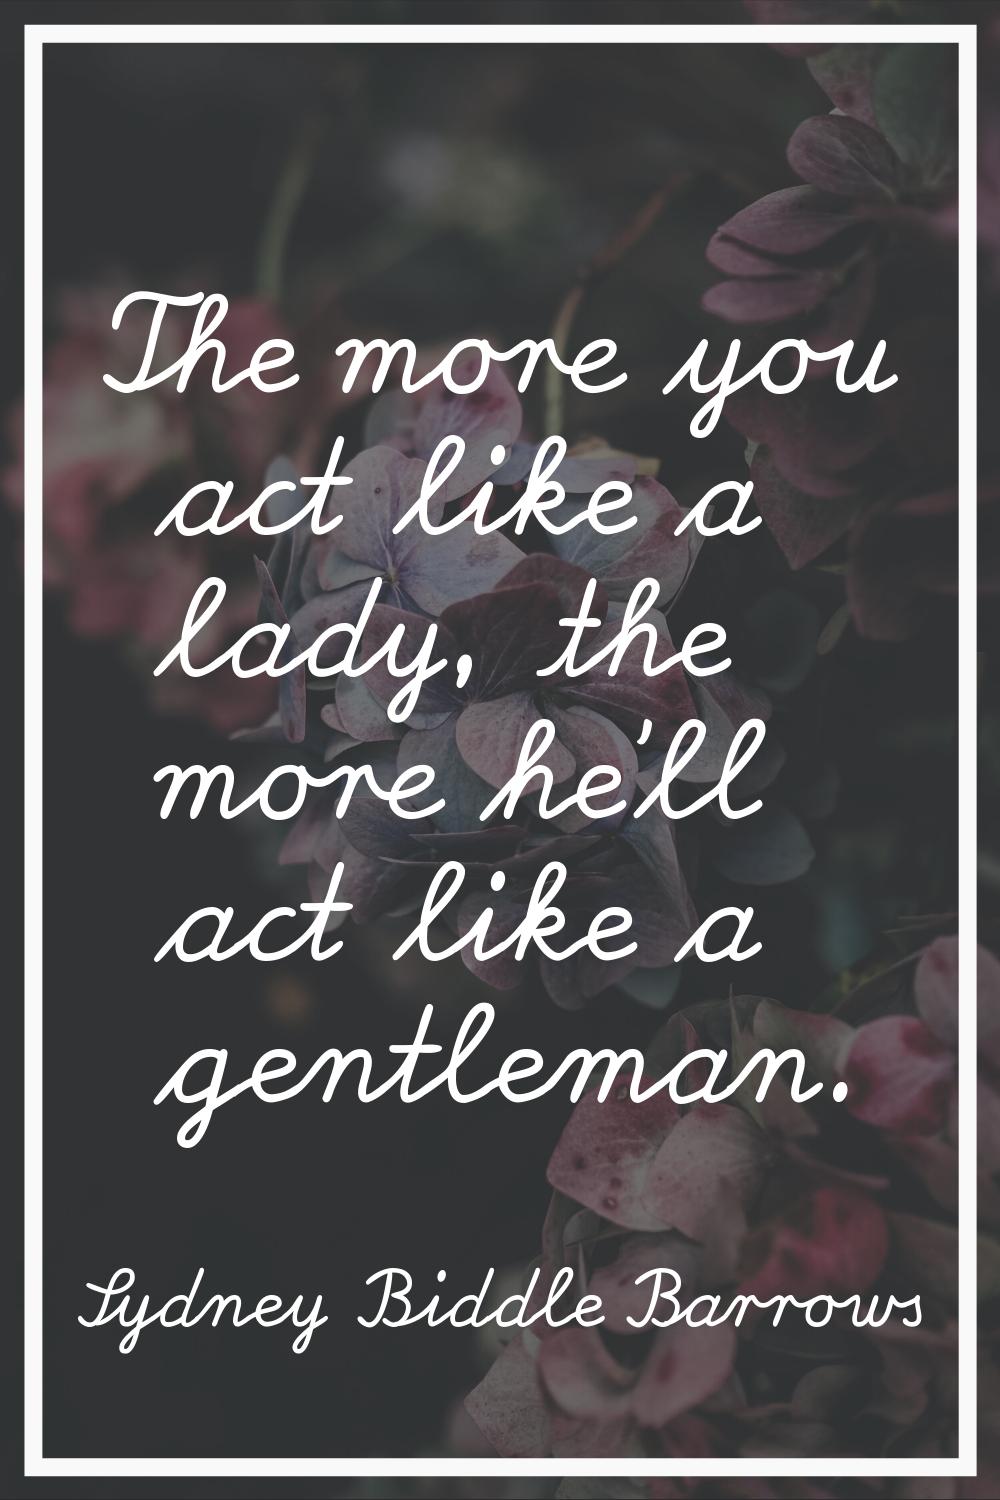 The more you act like a lady, the more he'll act like a gentleman.